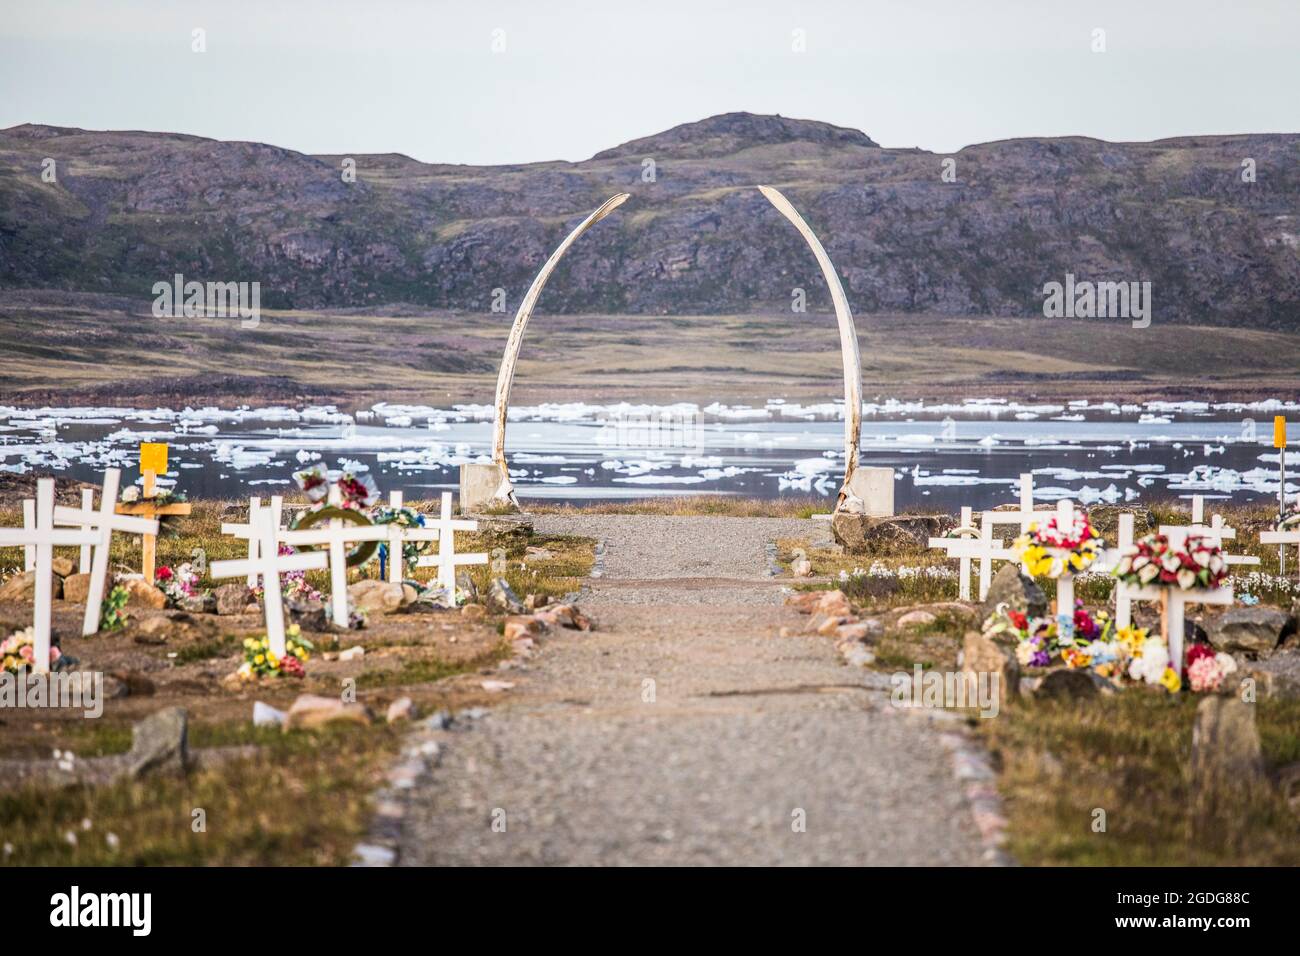 Ancestral cemetery with whale bones, Iqaluit, Baffin Island. Stock Photo